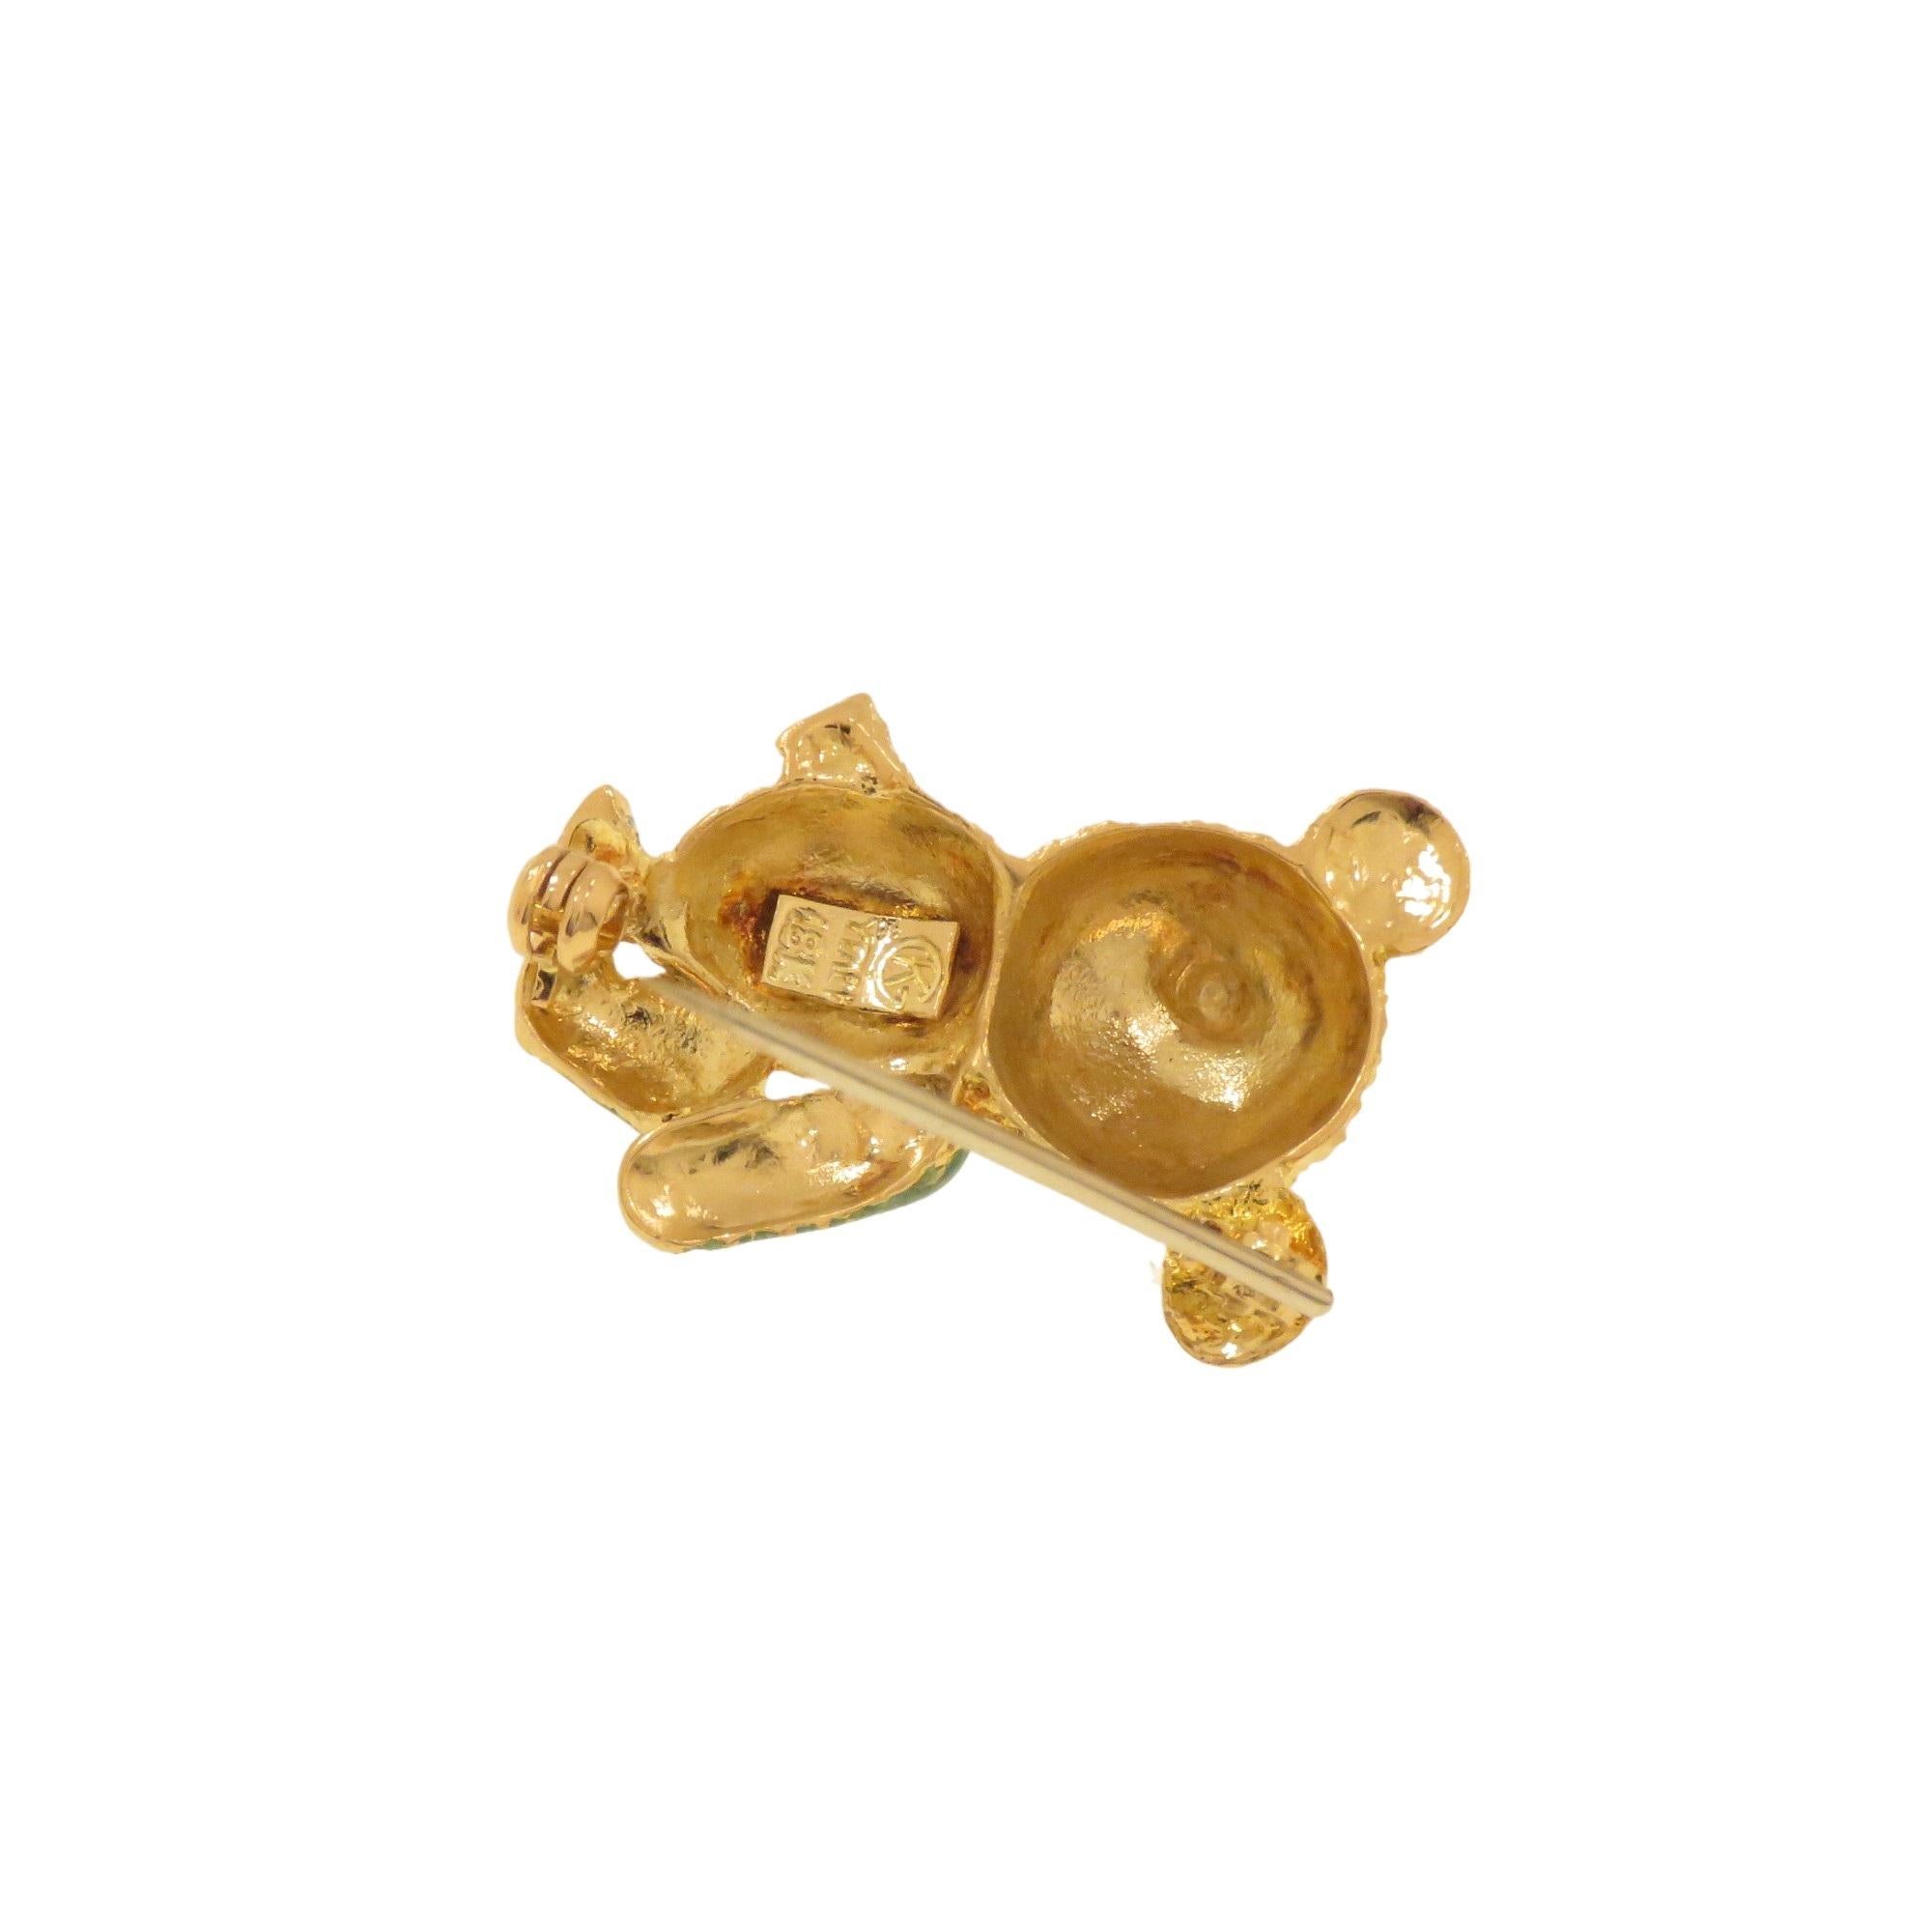 Retro Bear-shaped brooch made of gold with enamel For Sale